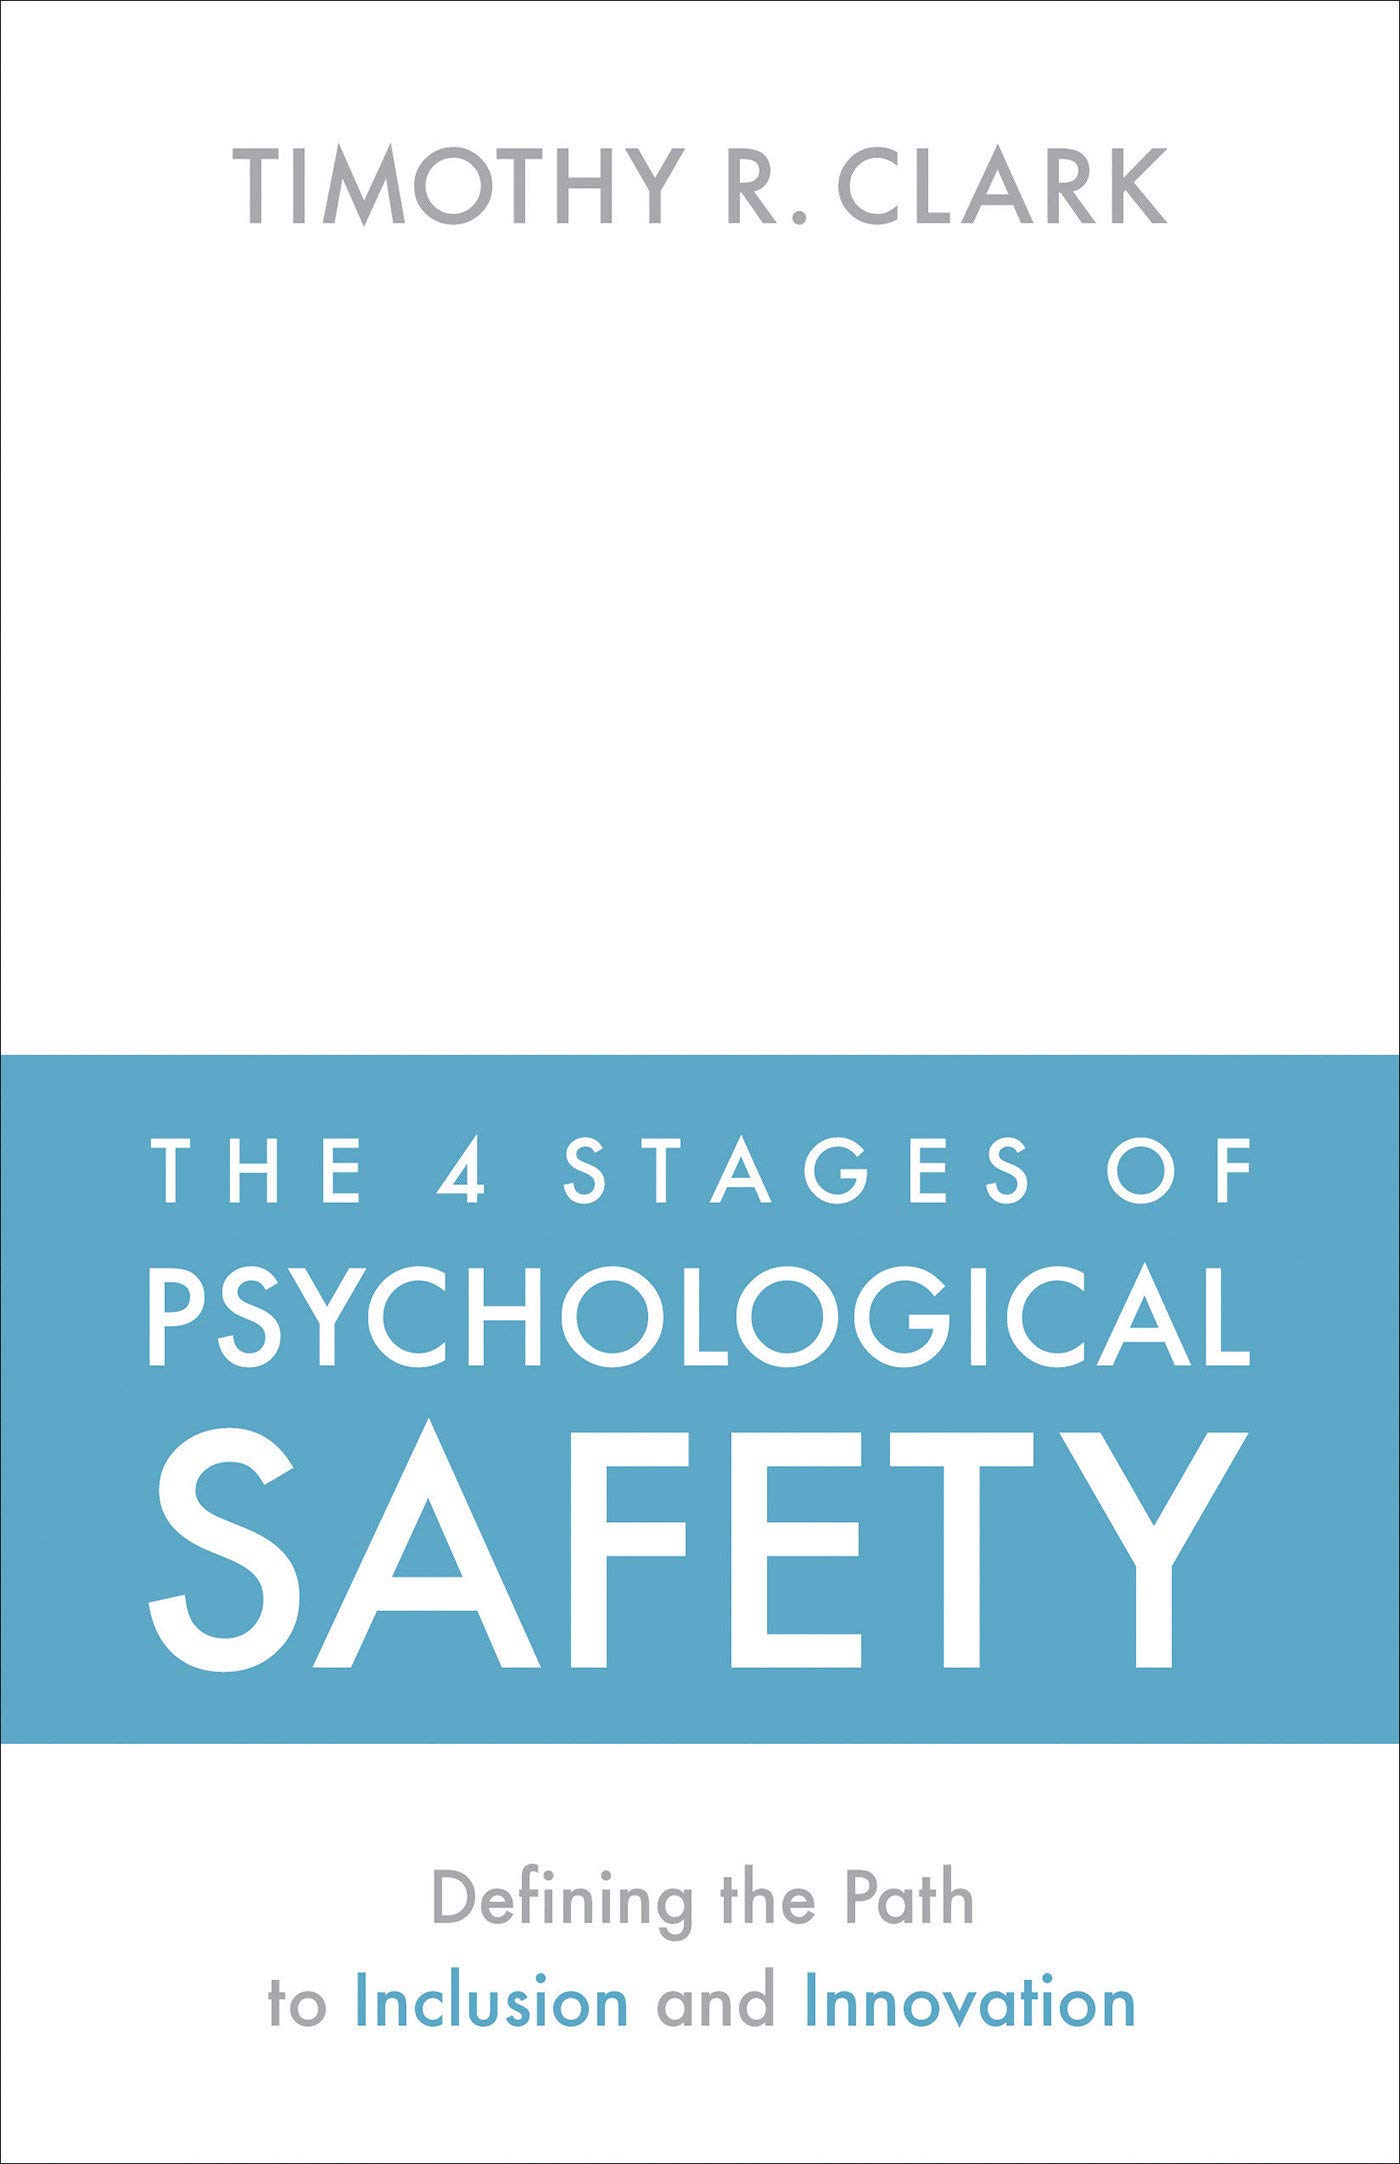 Timothy R. Clark: 4 Stages of Psychological Safety (2020, Berrett-Koehler Publishers, Incorporated)